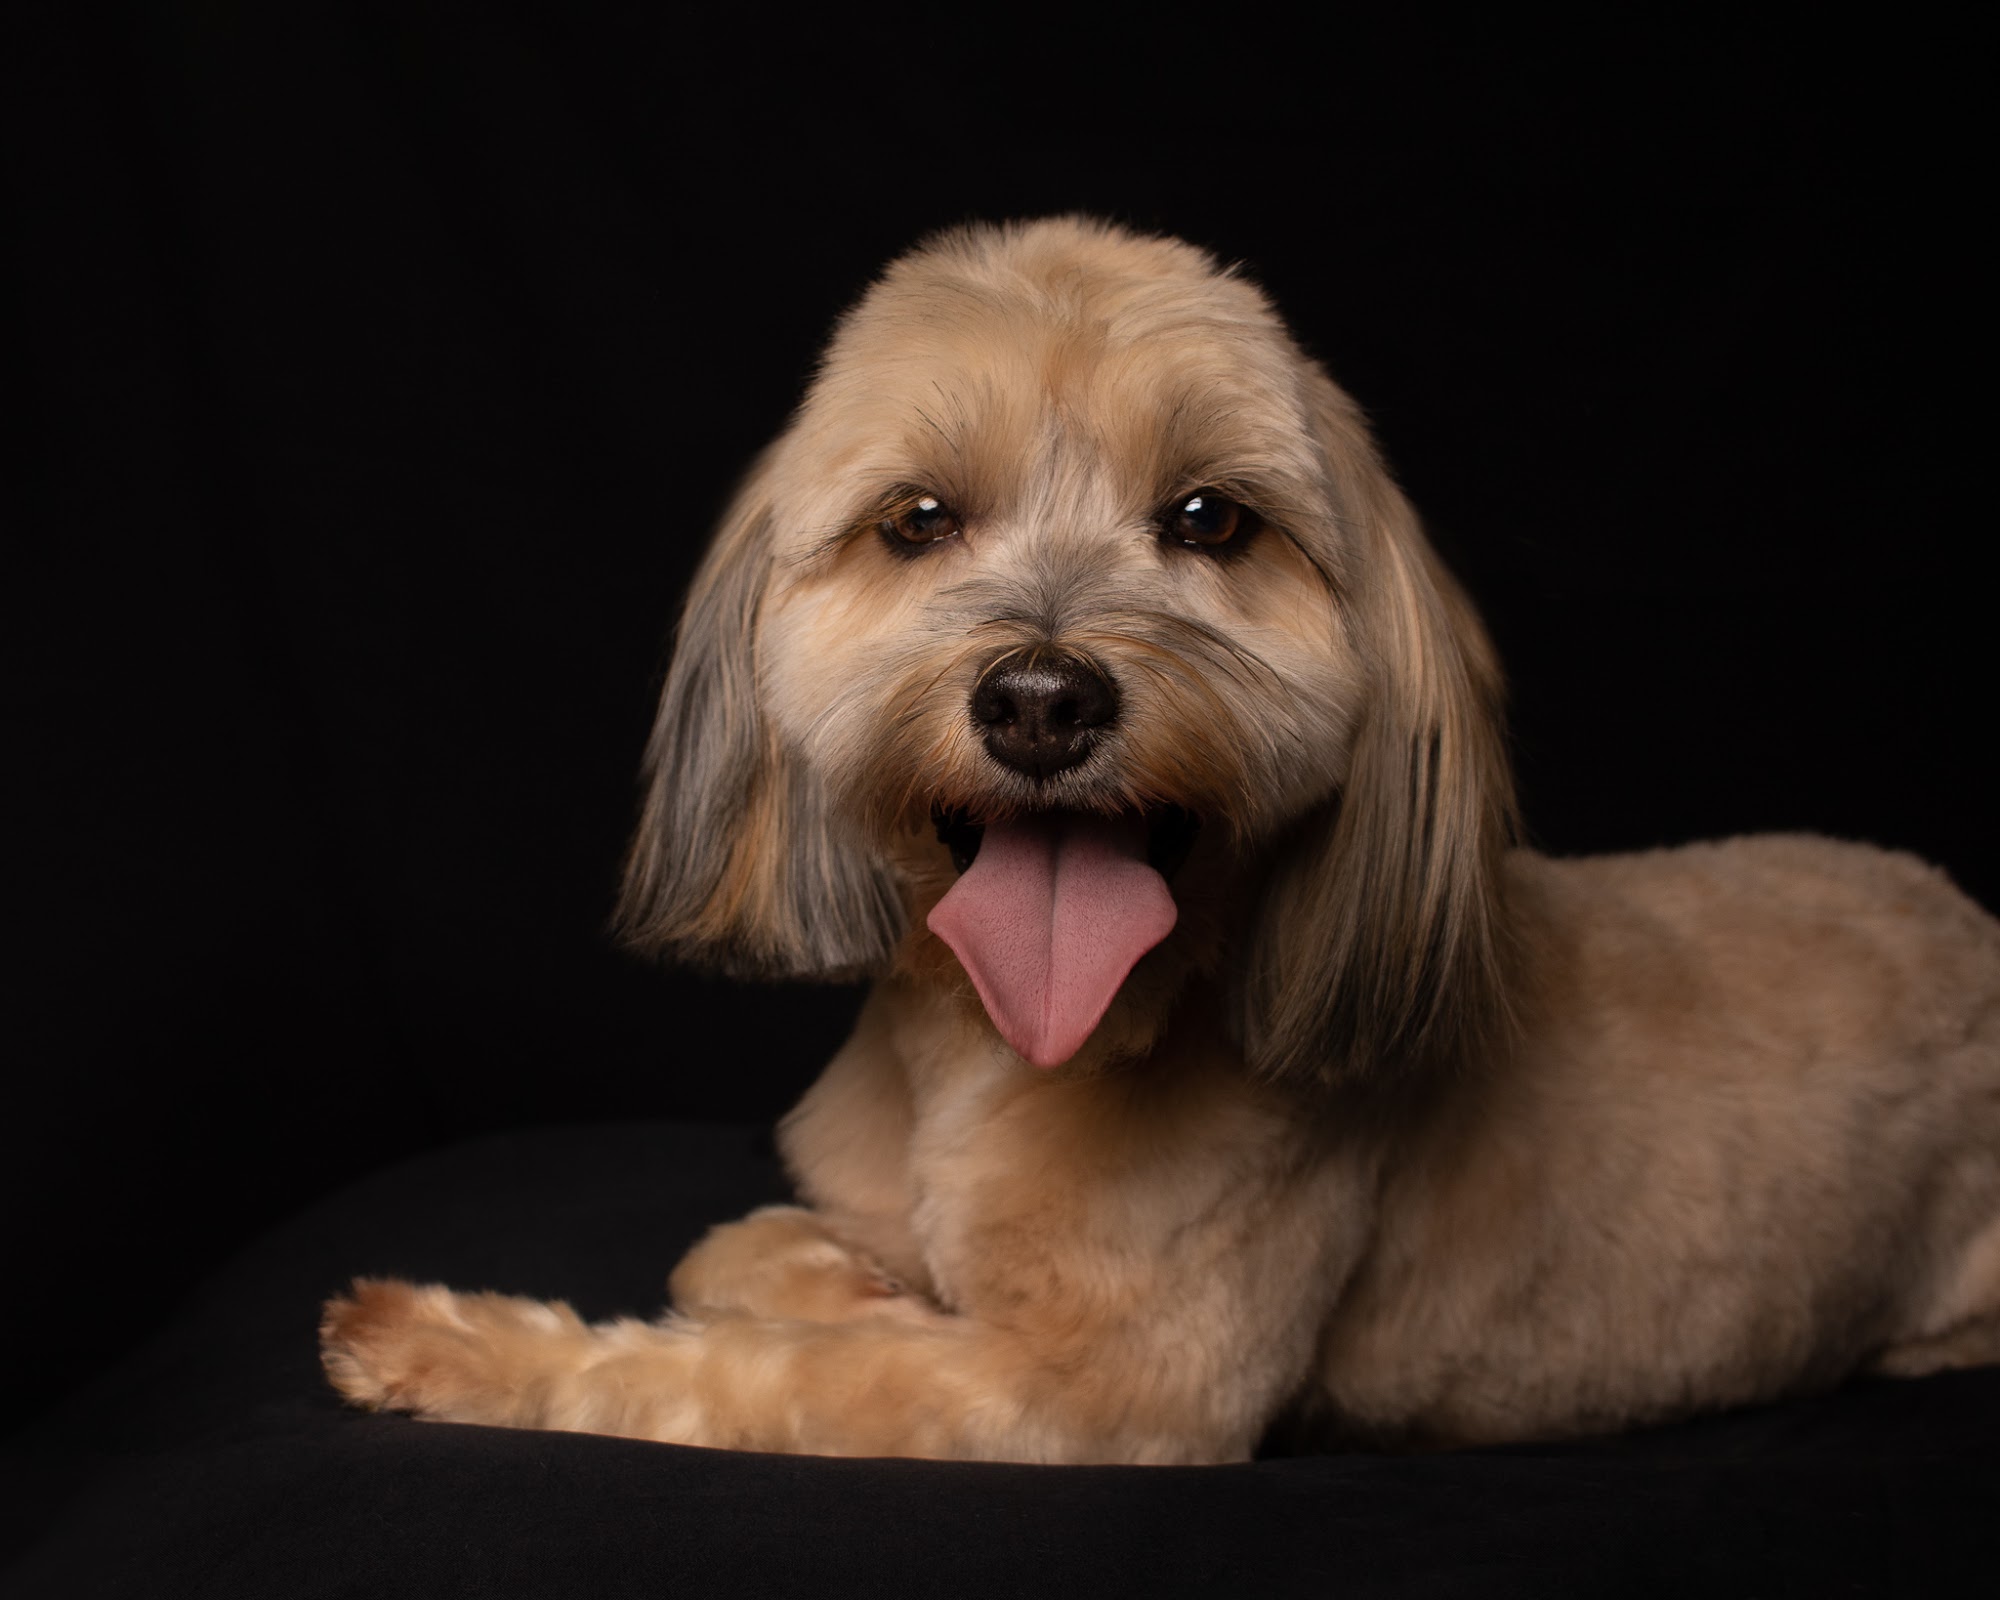 Murdock and Roo Dog Grooming & Pawtrait Photography 2120 Alvin Rd, Grand Island New York 14072